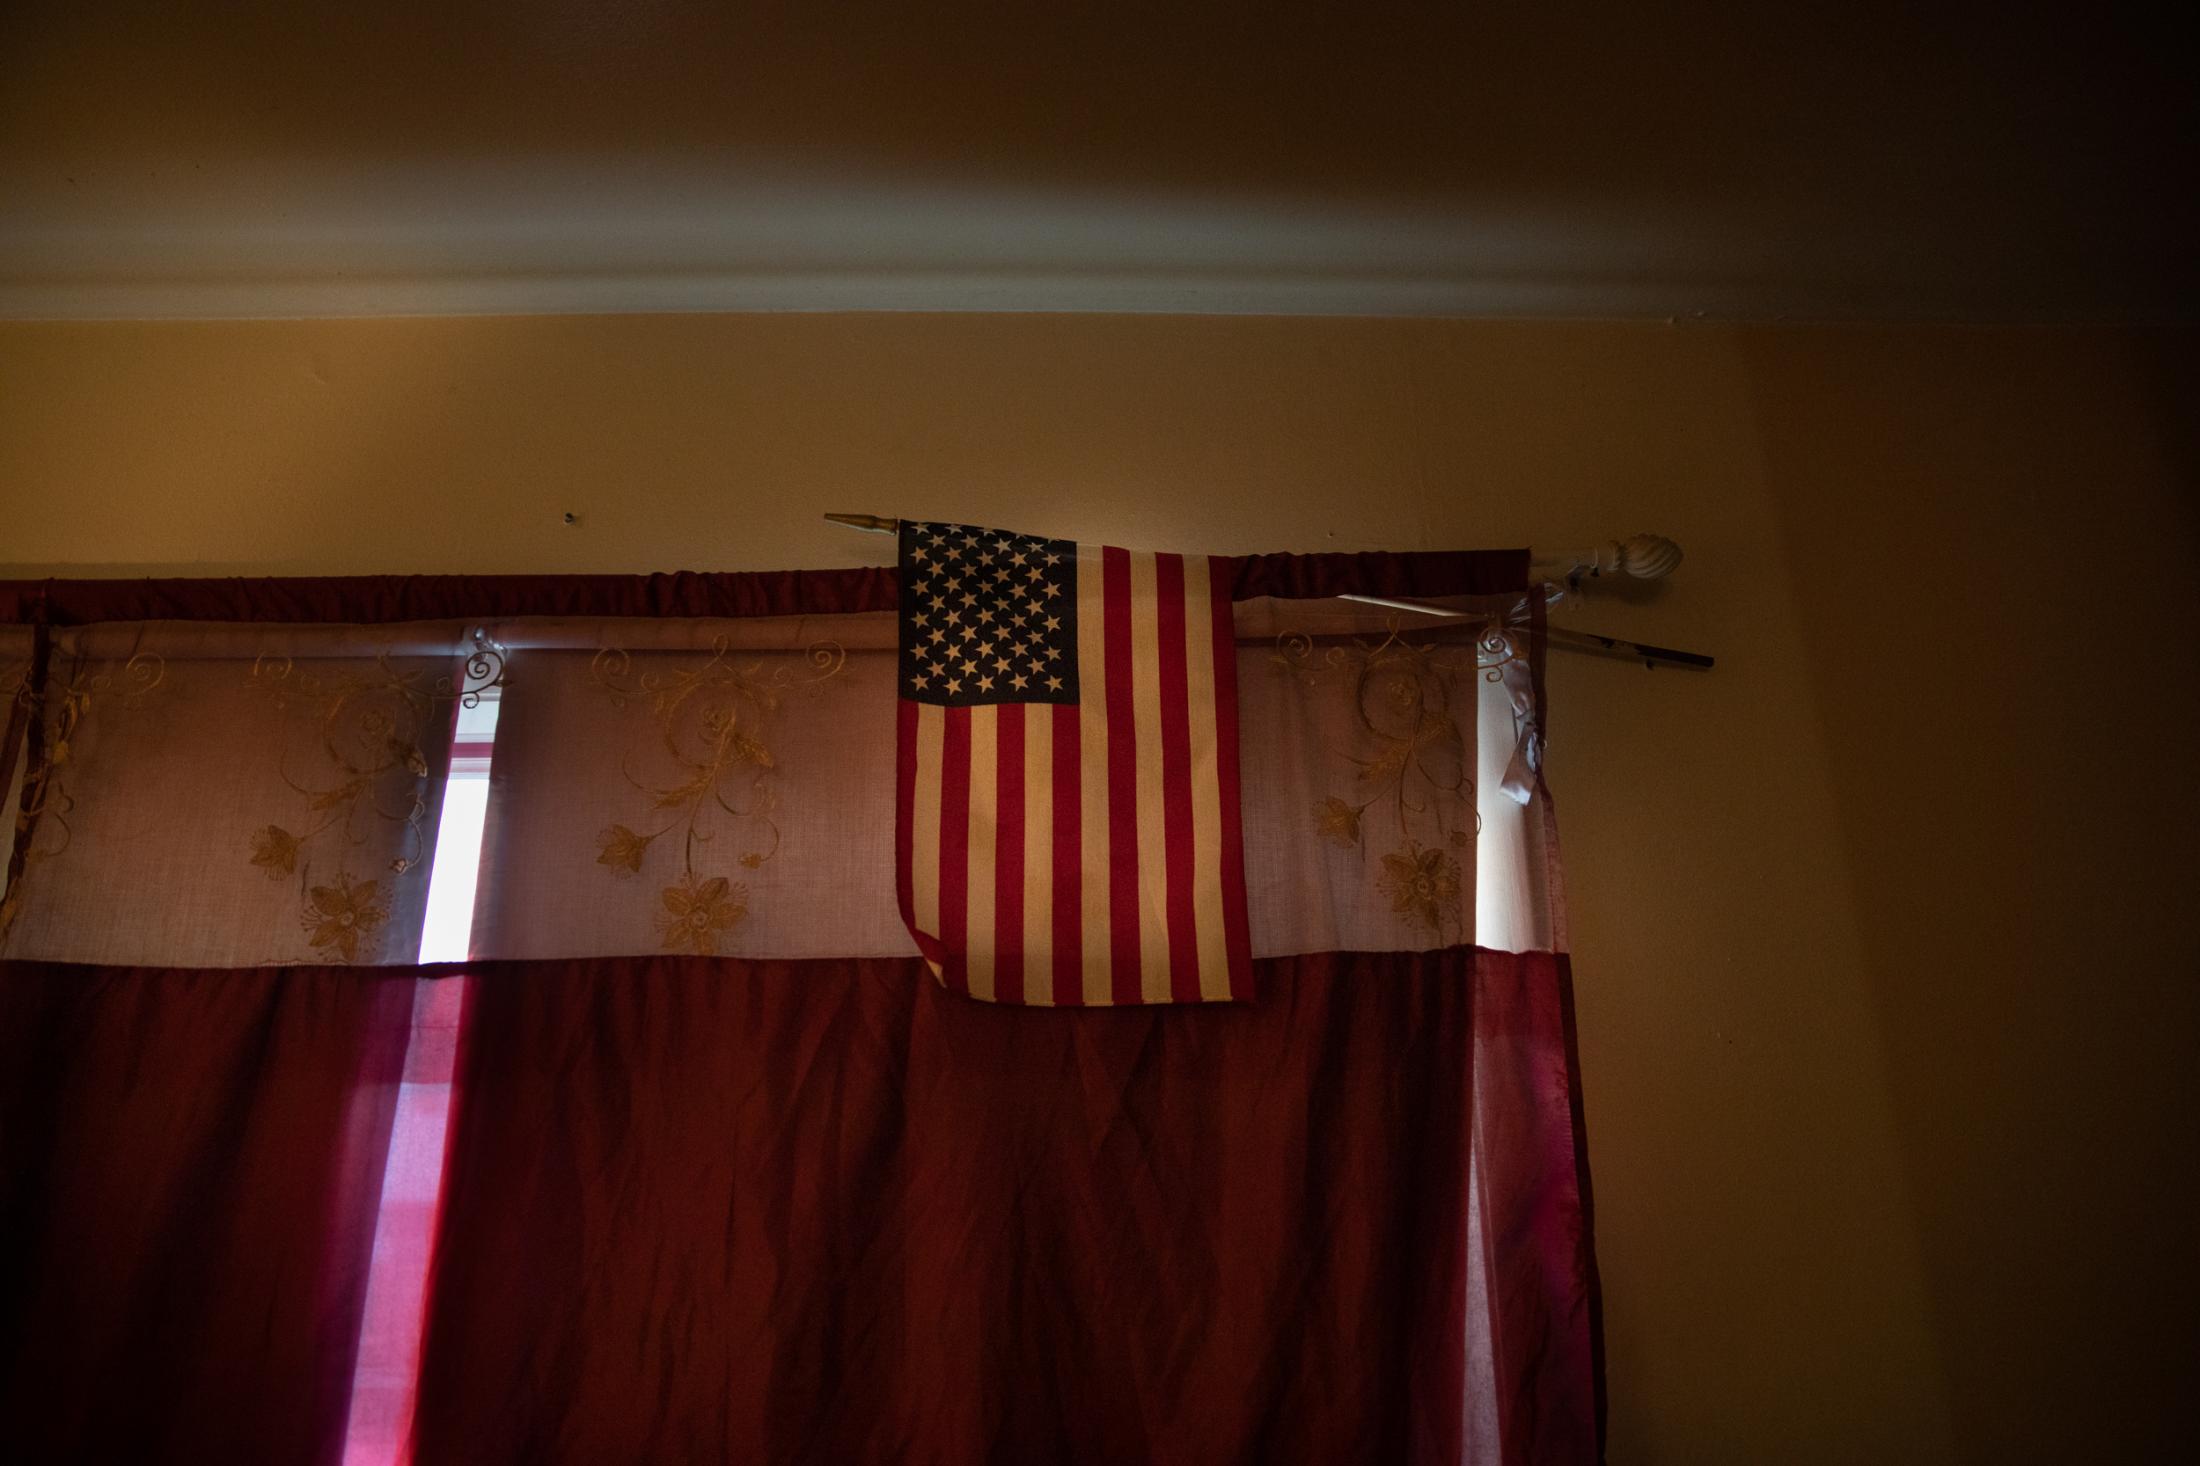 Belonging - An American flag stands alone by the window in a Sudanese...